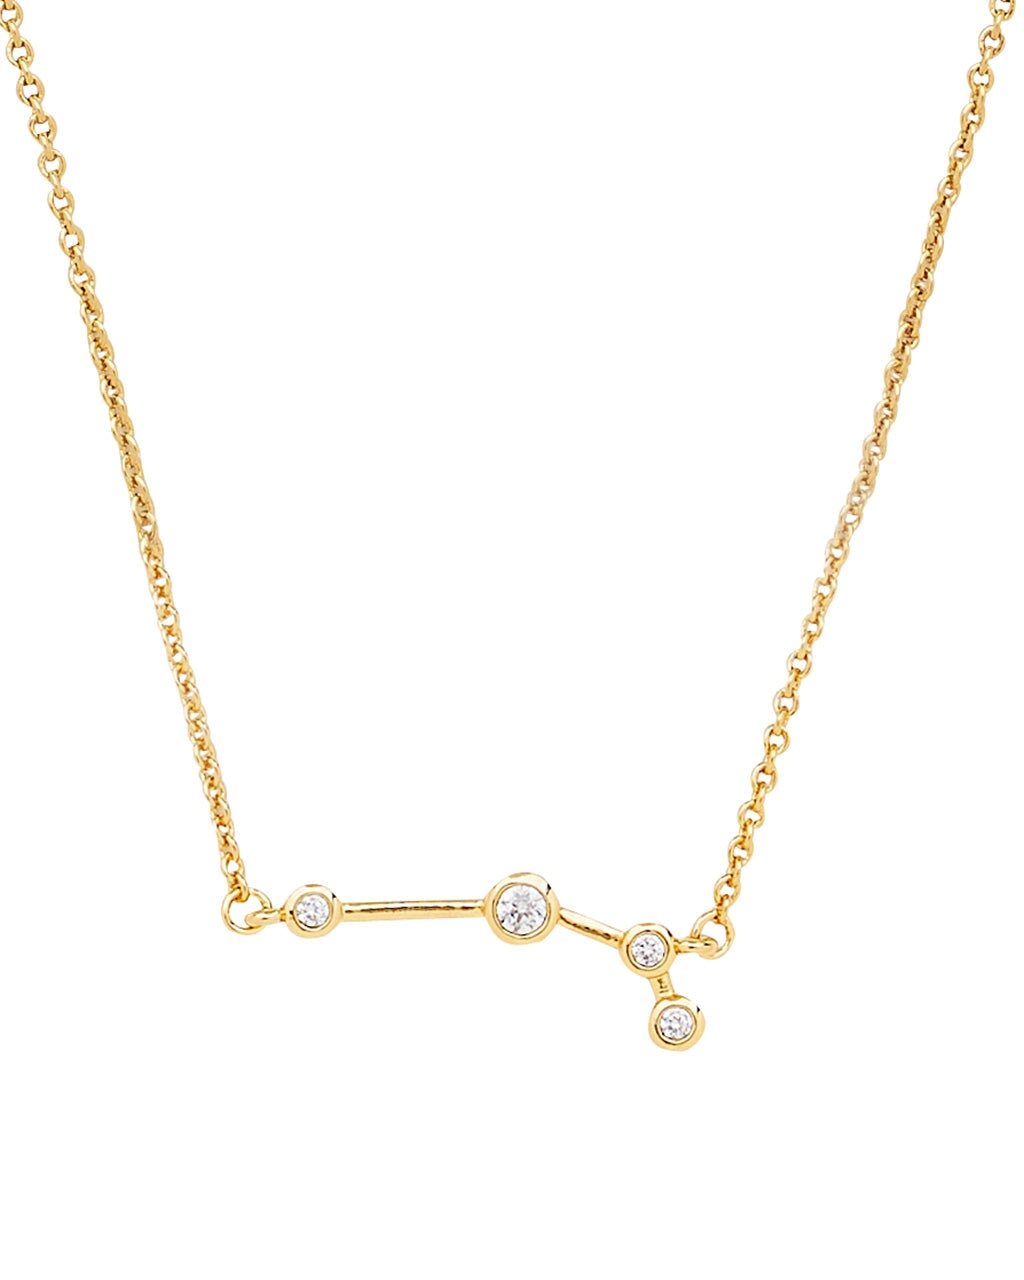 'When Stars Align' Constellation Necklace Necklace Sterling Forever Gold Aries (Mar 21 - Apr 19) 